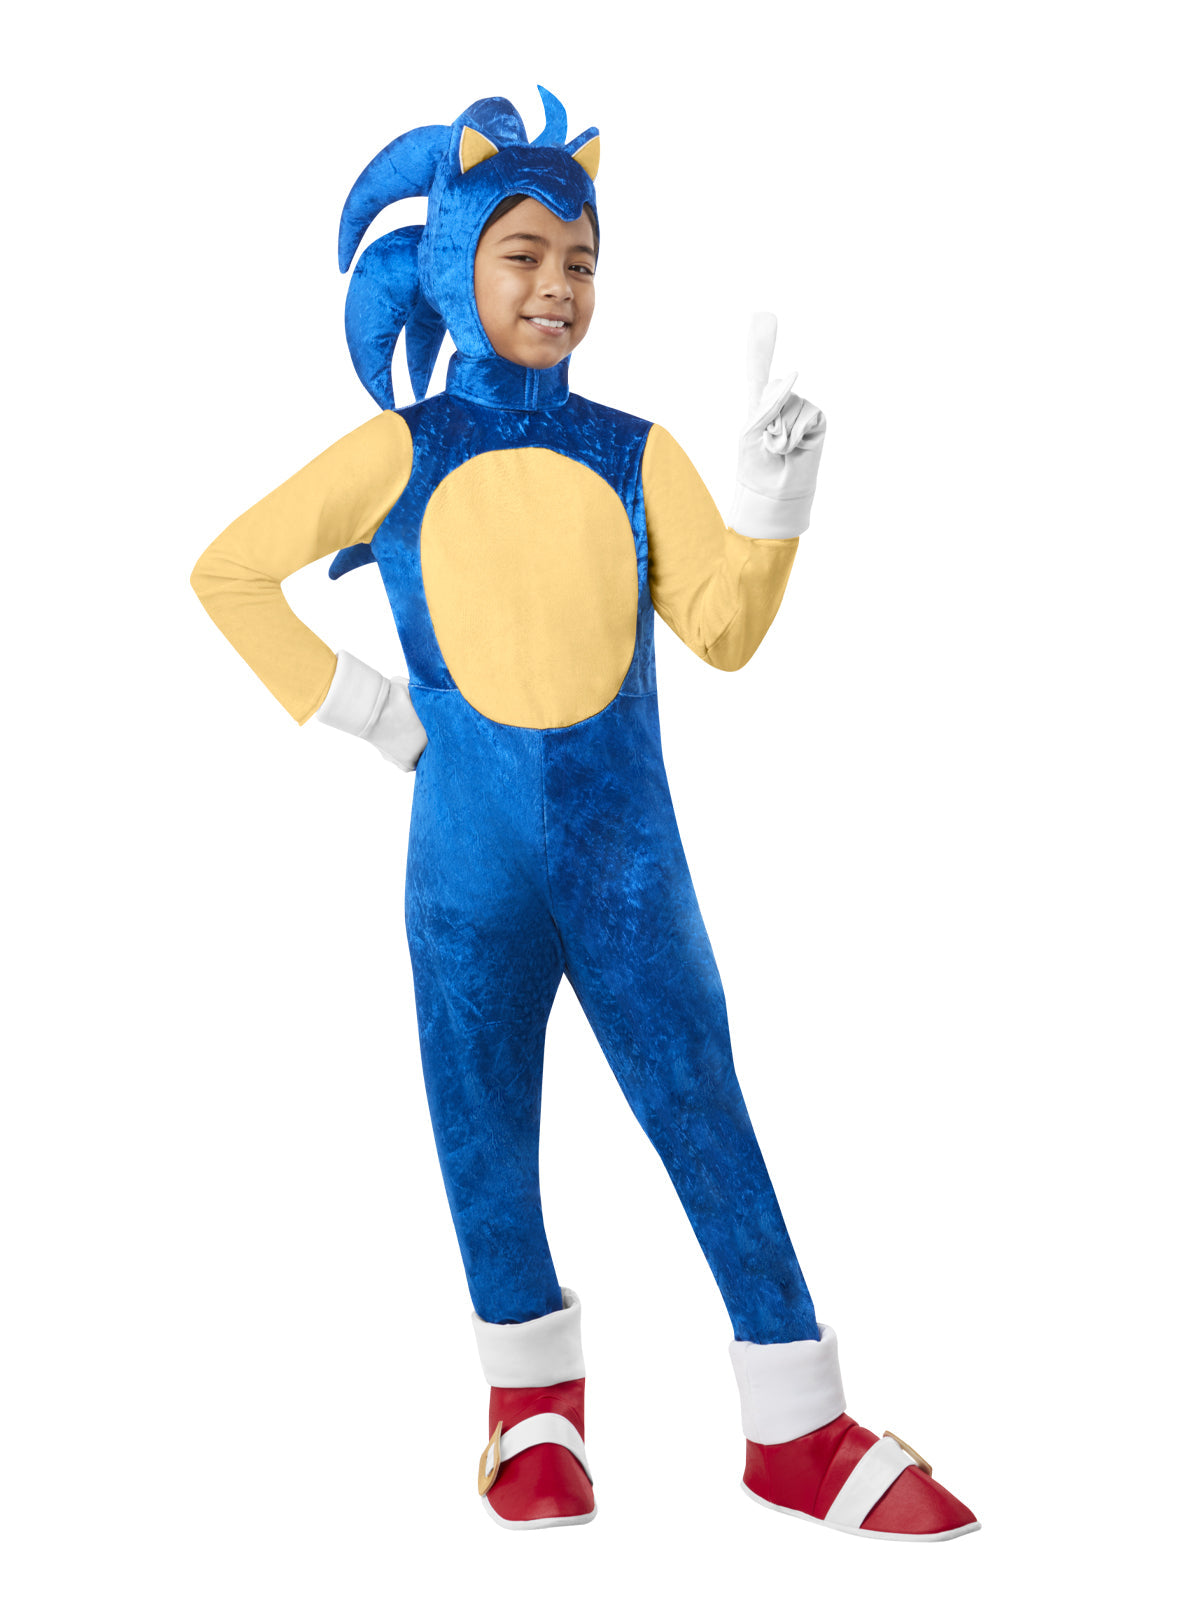 Sonic the Hedgehog Deluxe Costume for Kids - Sonic the Hedgehog